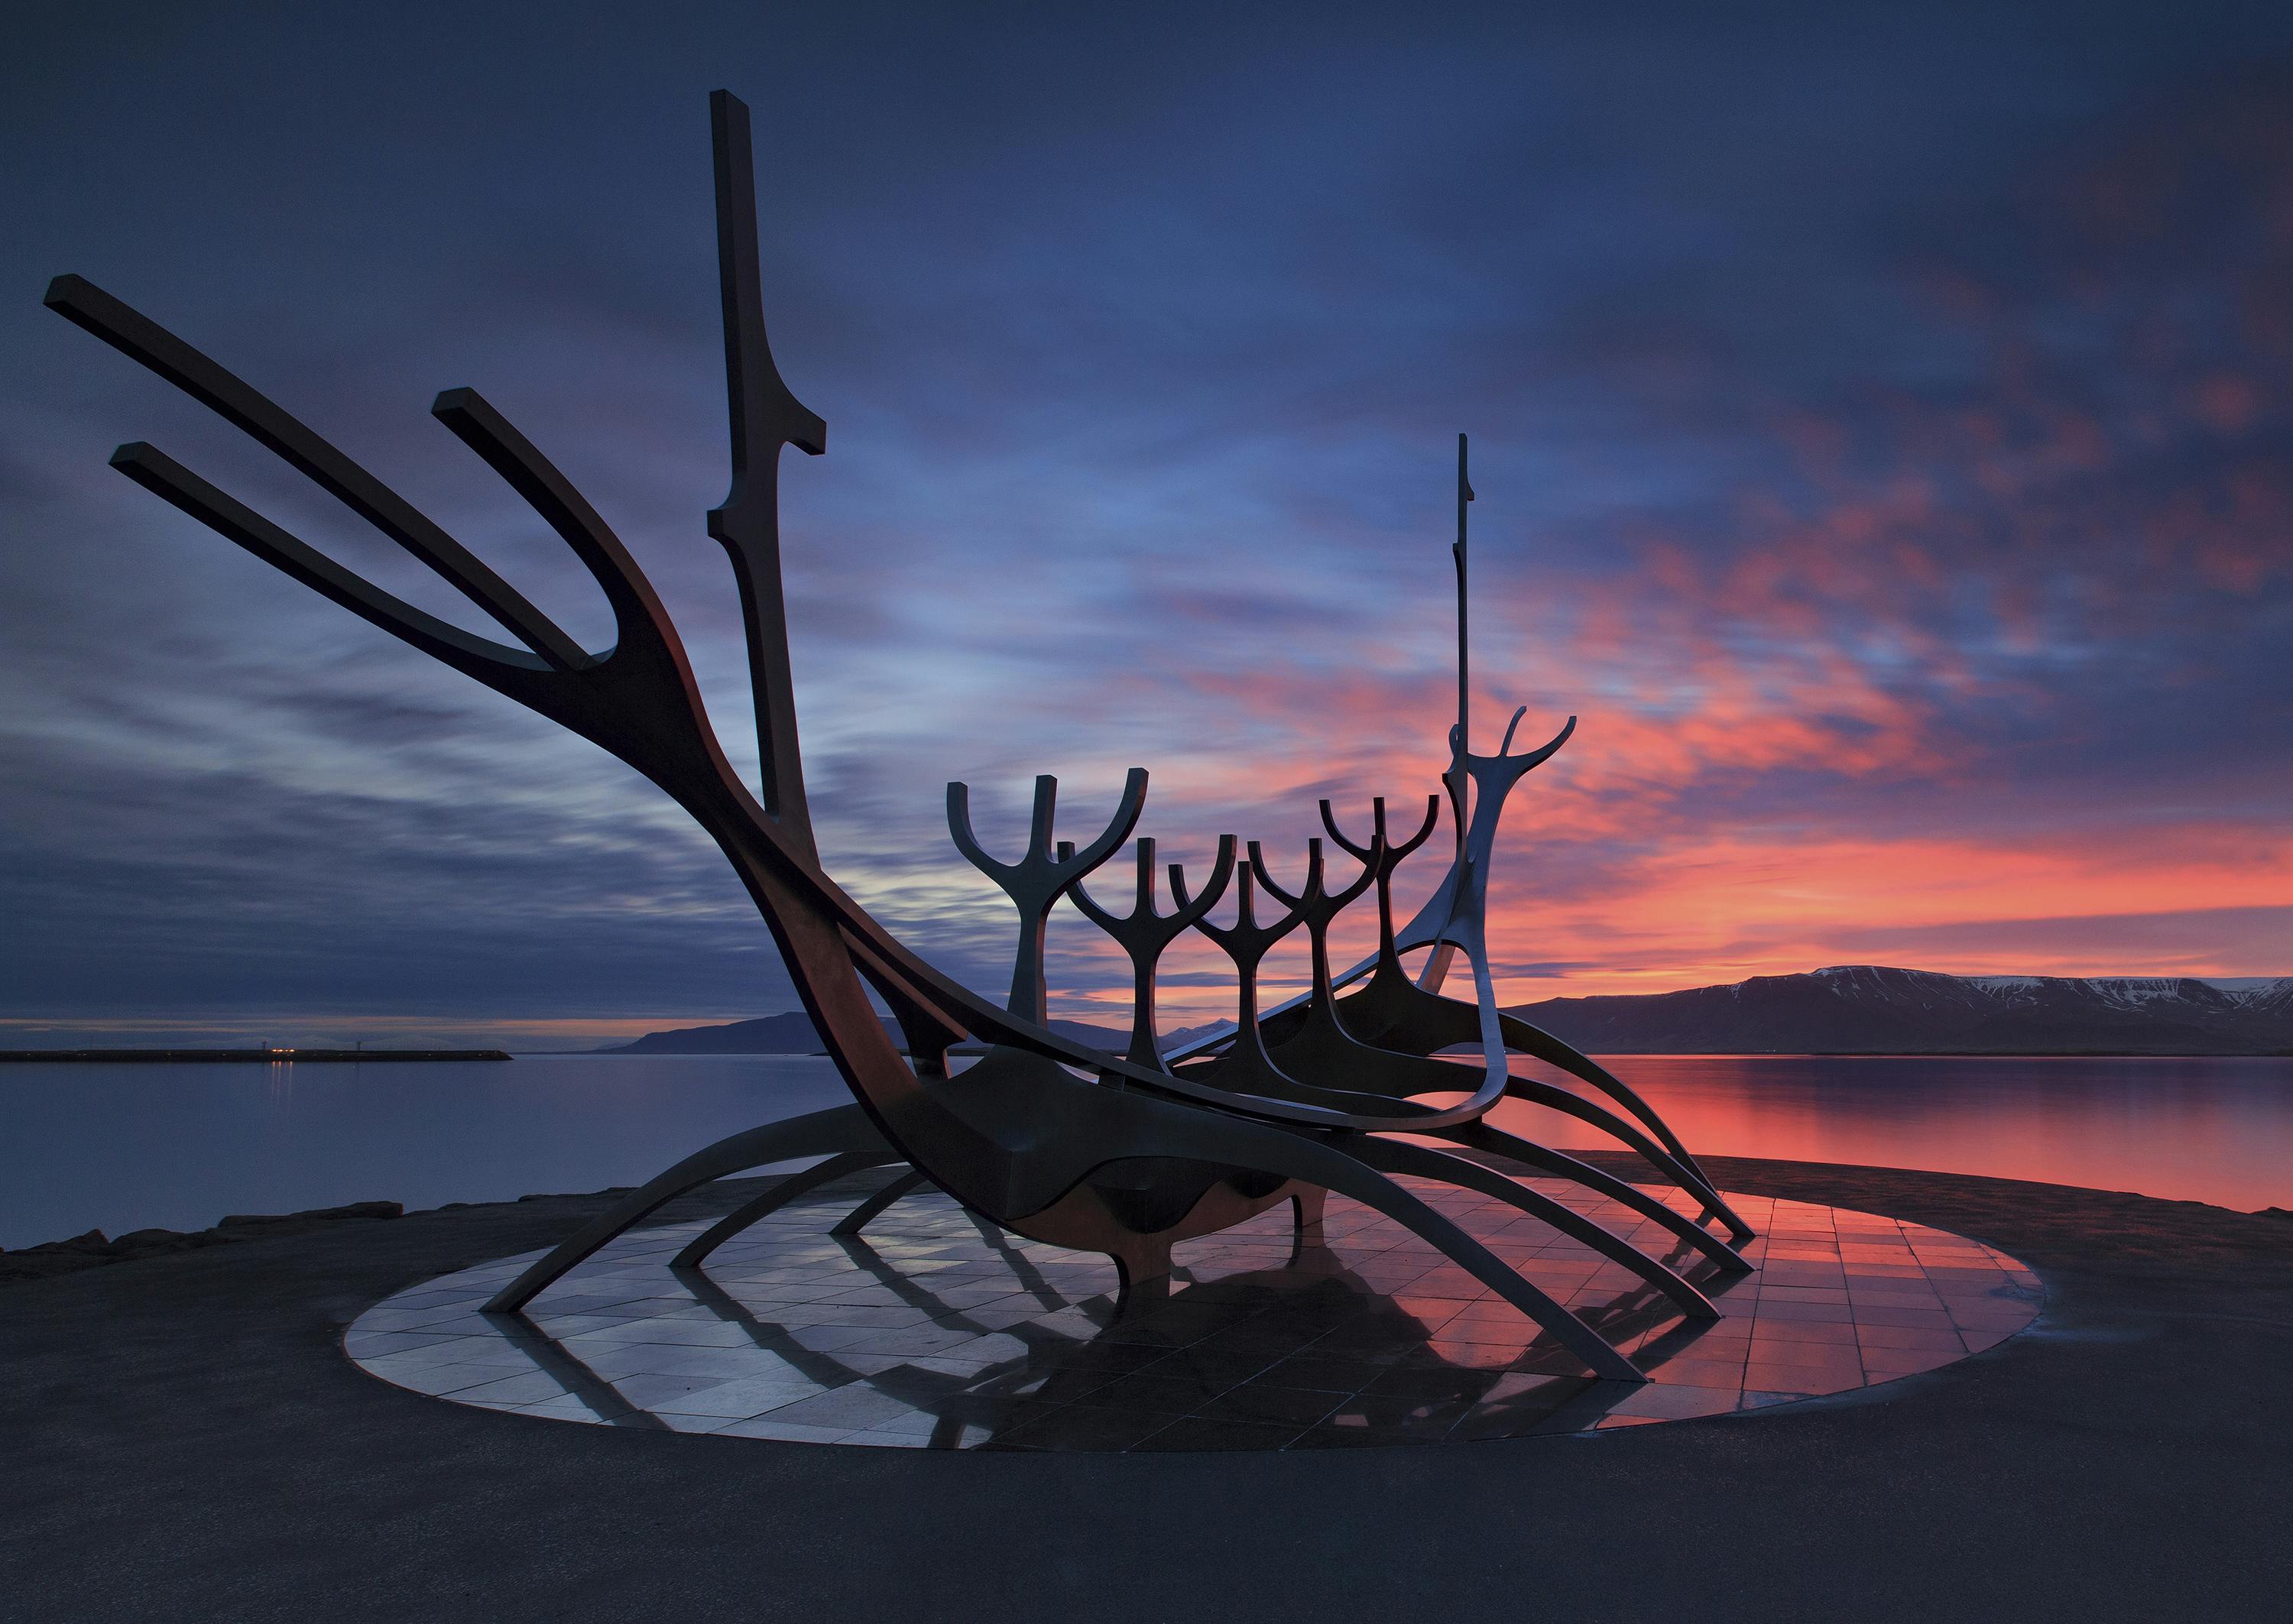 The Sun Voyager sculpture at sunset. This wonderful work of art can be found next to Harpa Concert Hall in downtown Reykjavík.